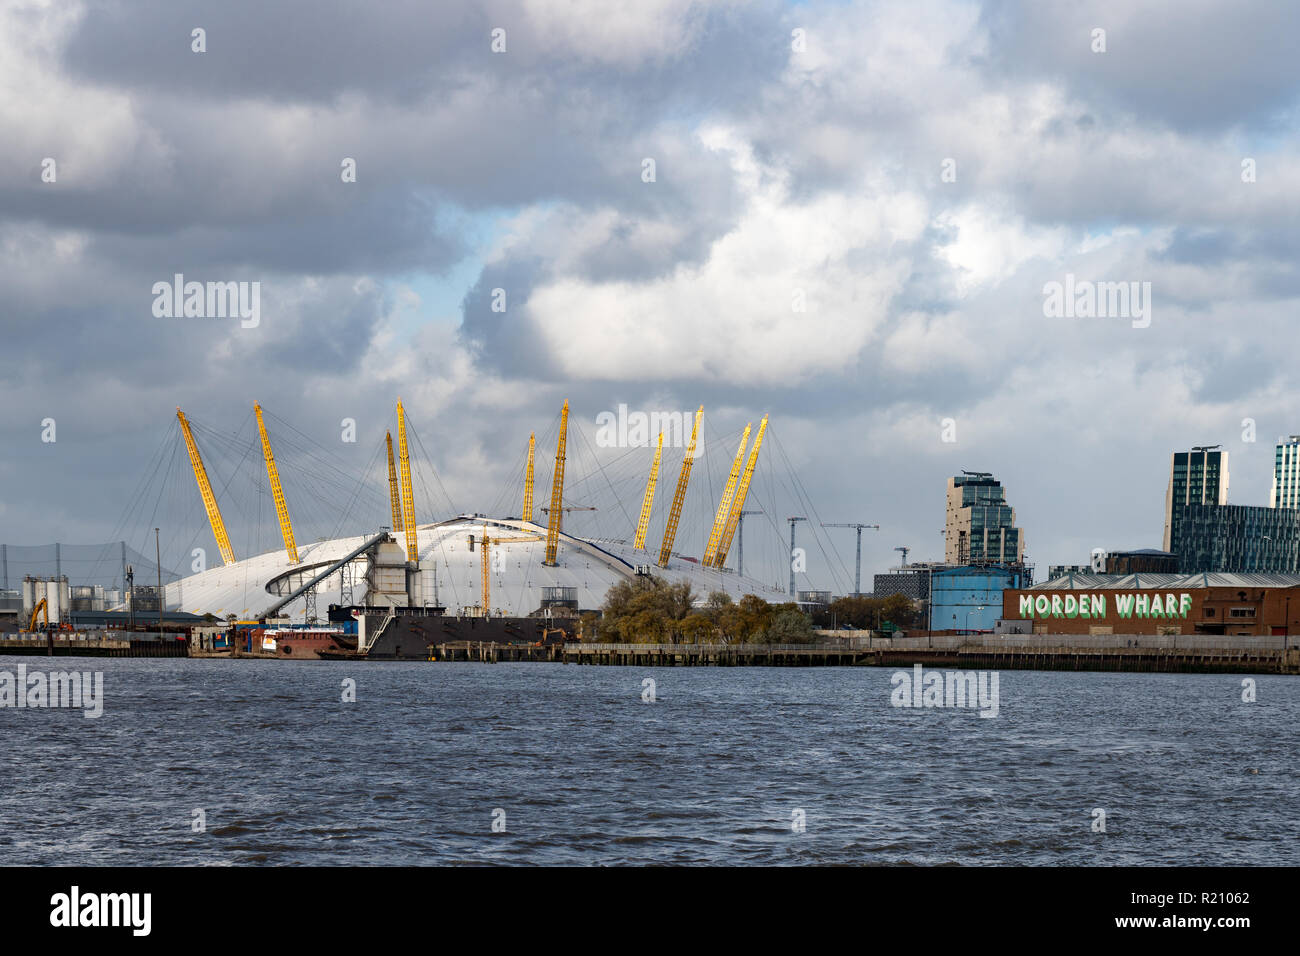 The O2 Arena. From the Open City Thames Architecture Tour East. Photo date: Saturday, November 10, 2018. Photo: Roger Garfield/Alamy Stock Photo